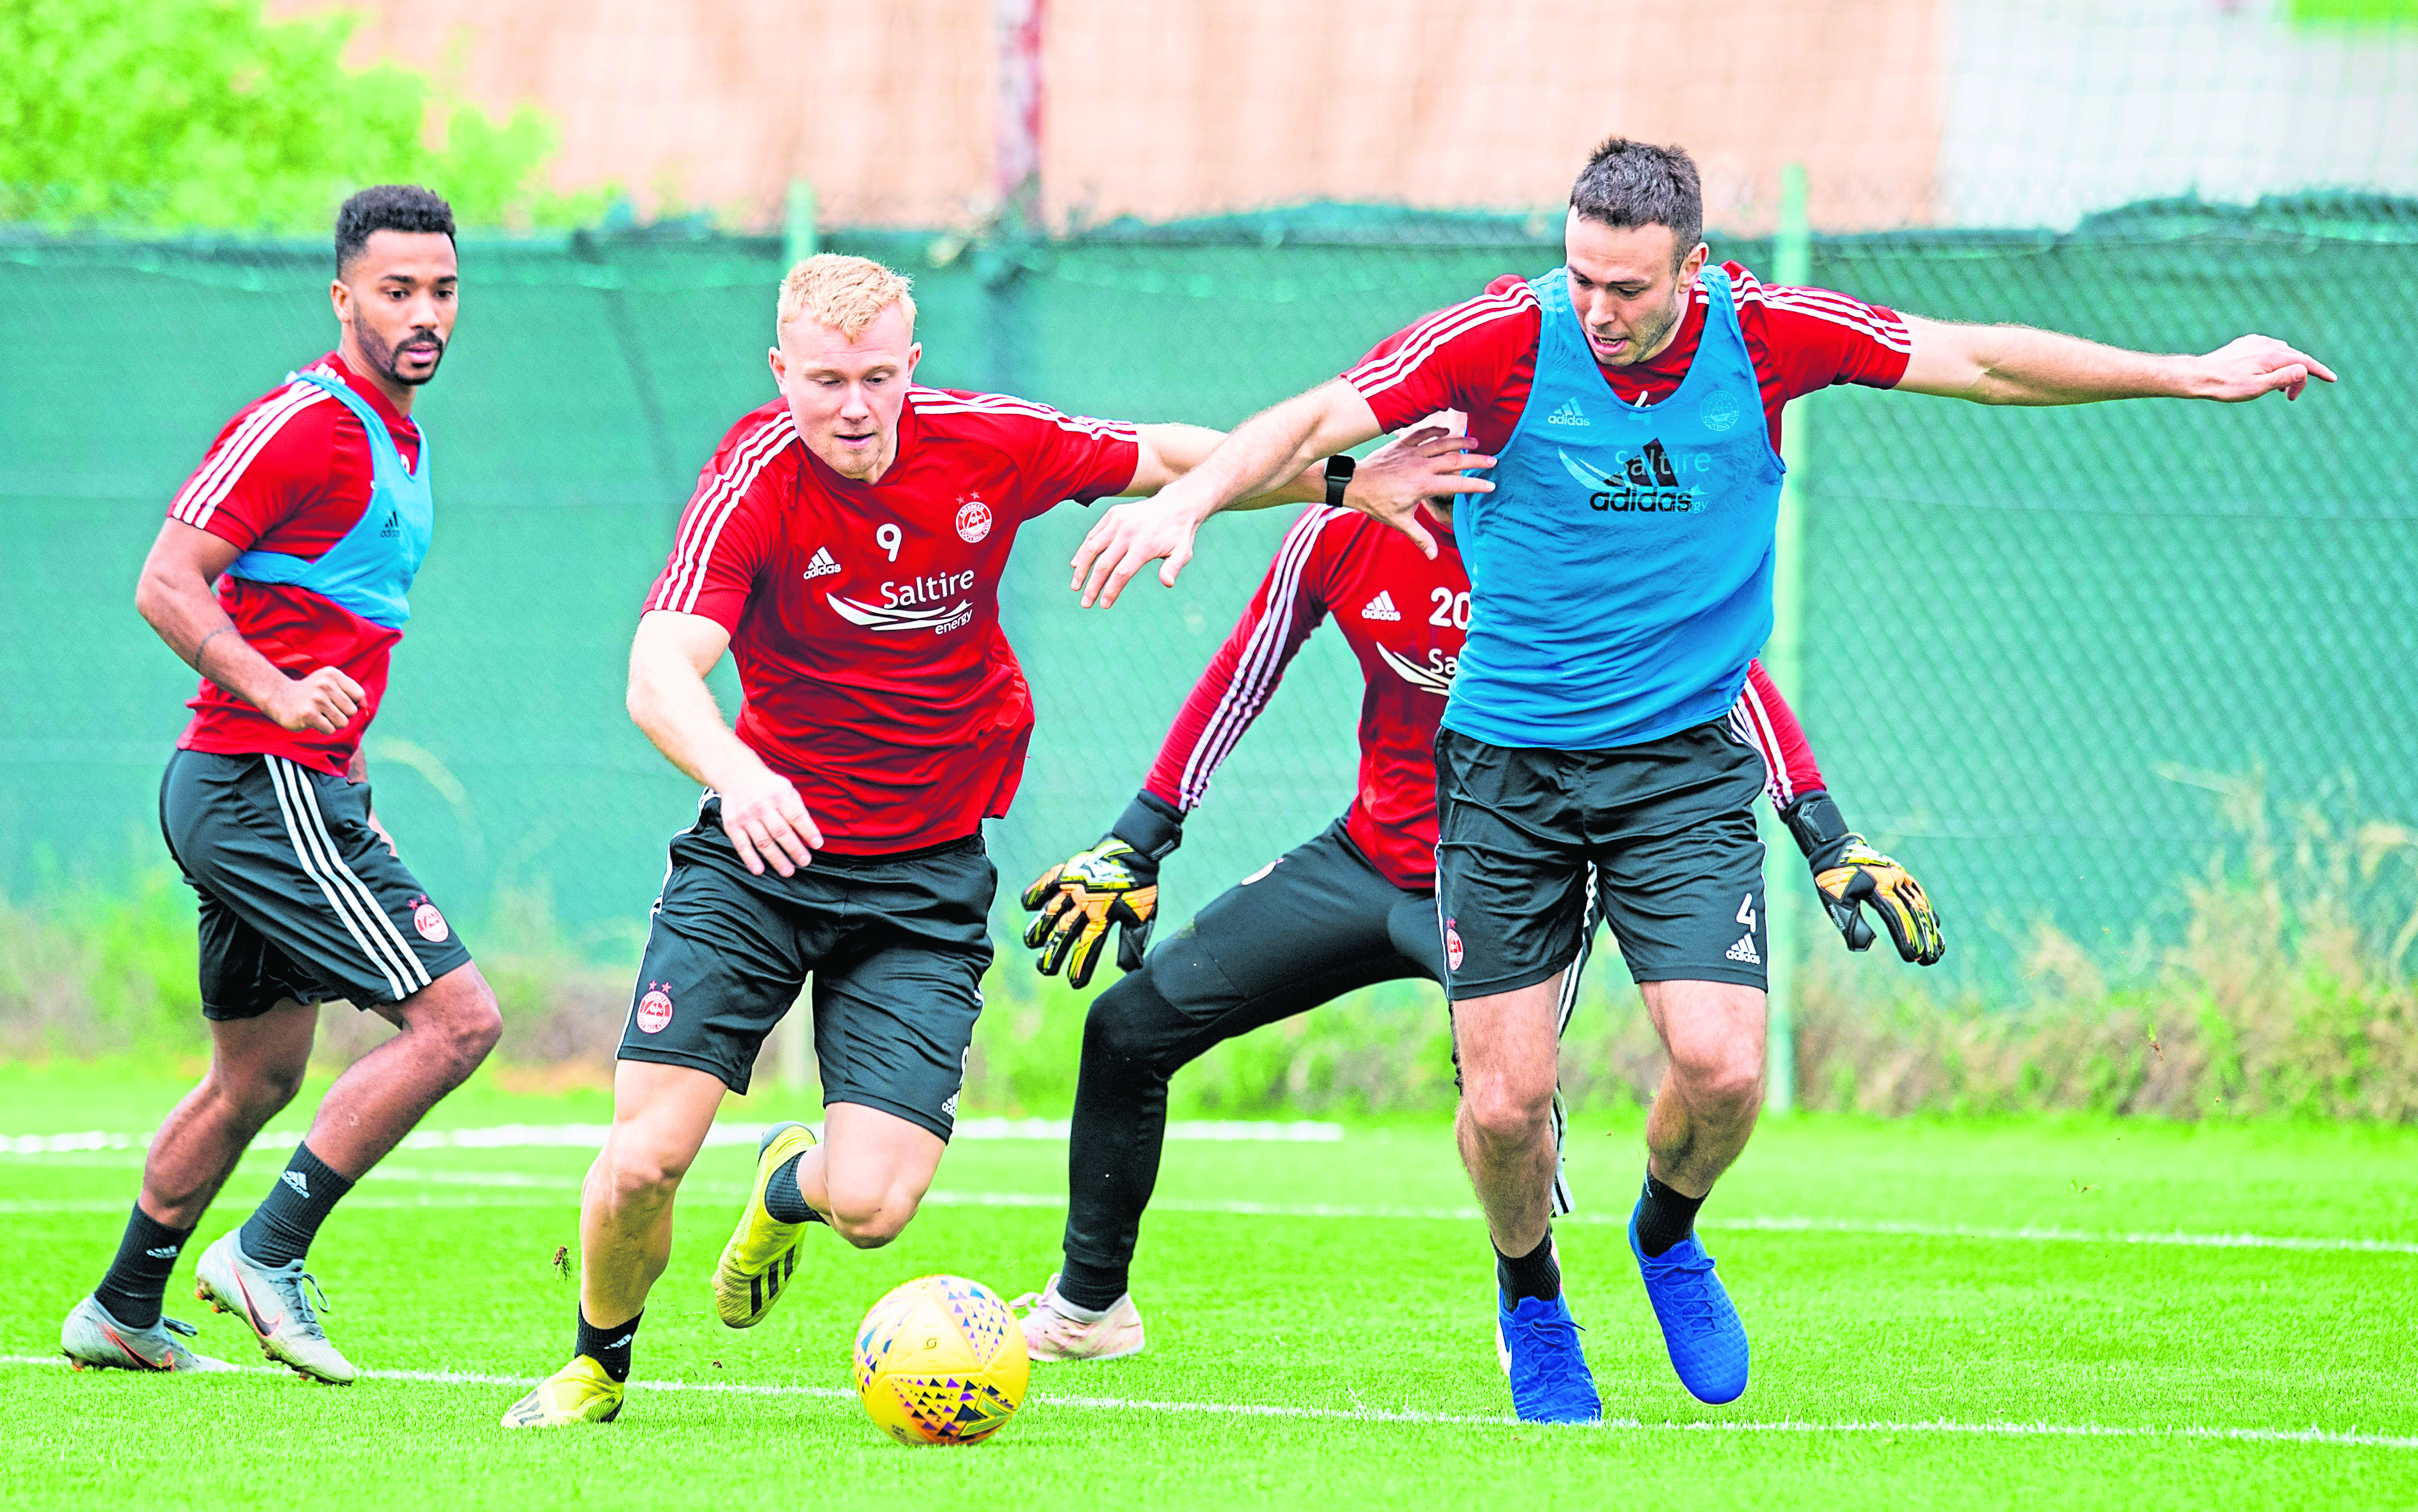 Aberdeen's Curtis Main (L) and Andrew Considine in Dubai, United Arab Emirates. Photo by Craig Williamson / SNS Group.